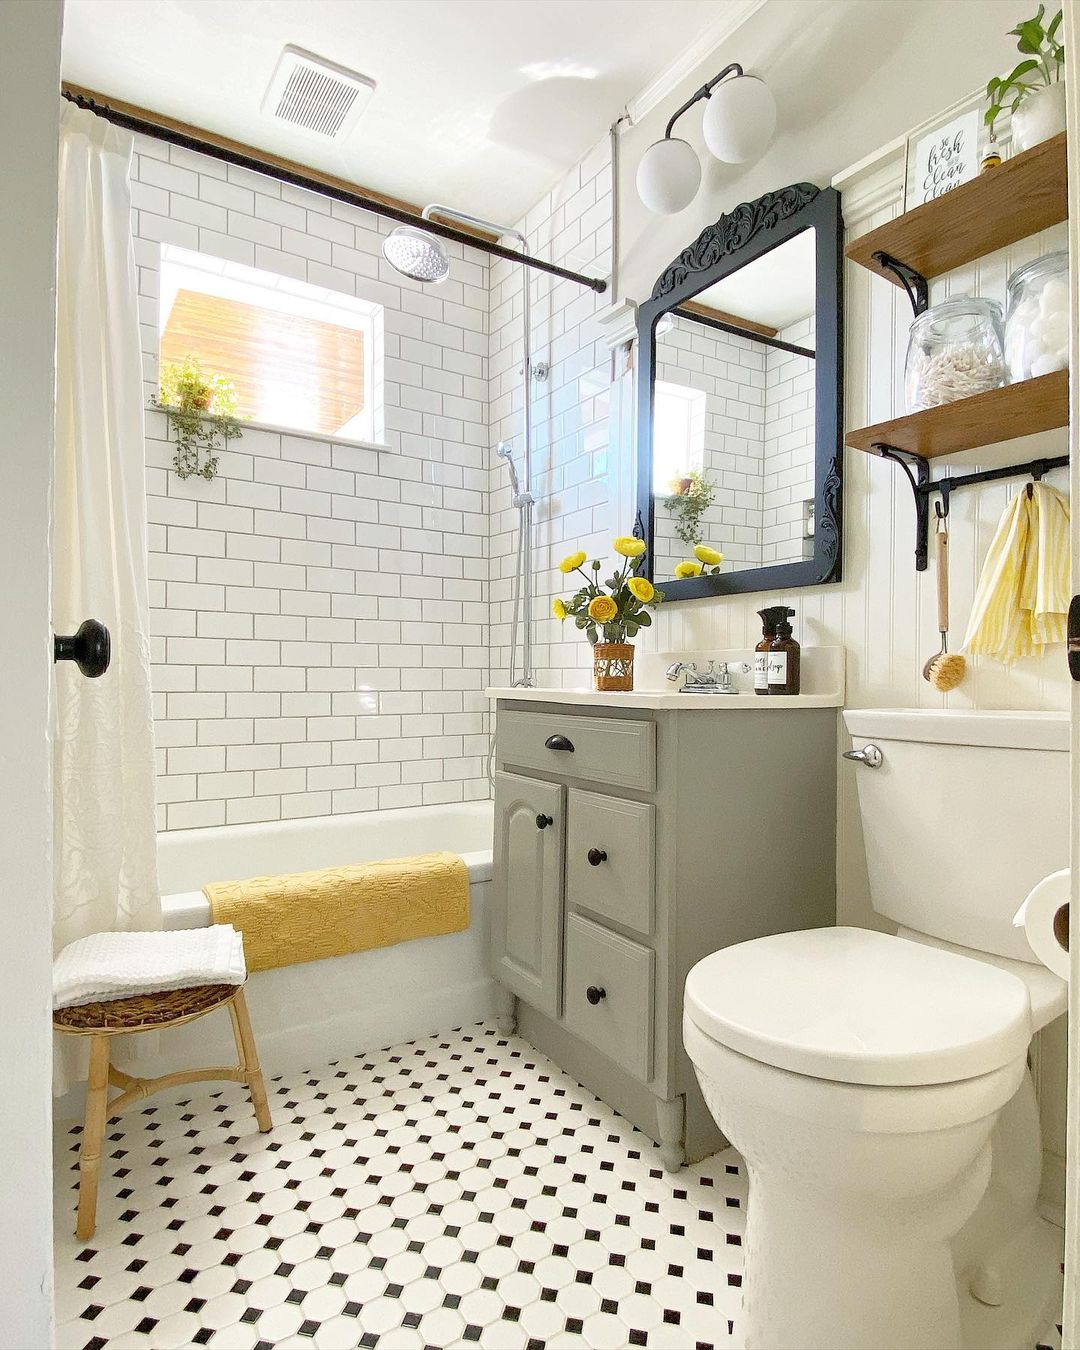 Updated Bathroom with Subway Tile Walls in the Shower. Photo by Instagram user @my.purposed.place